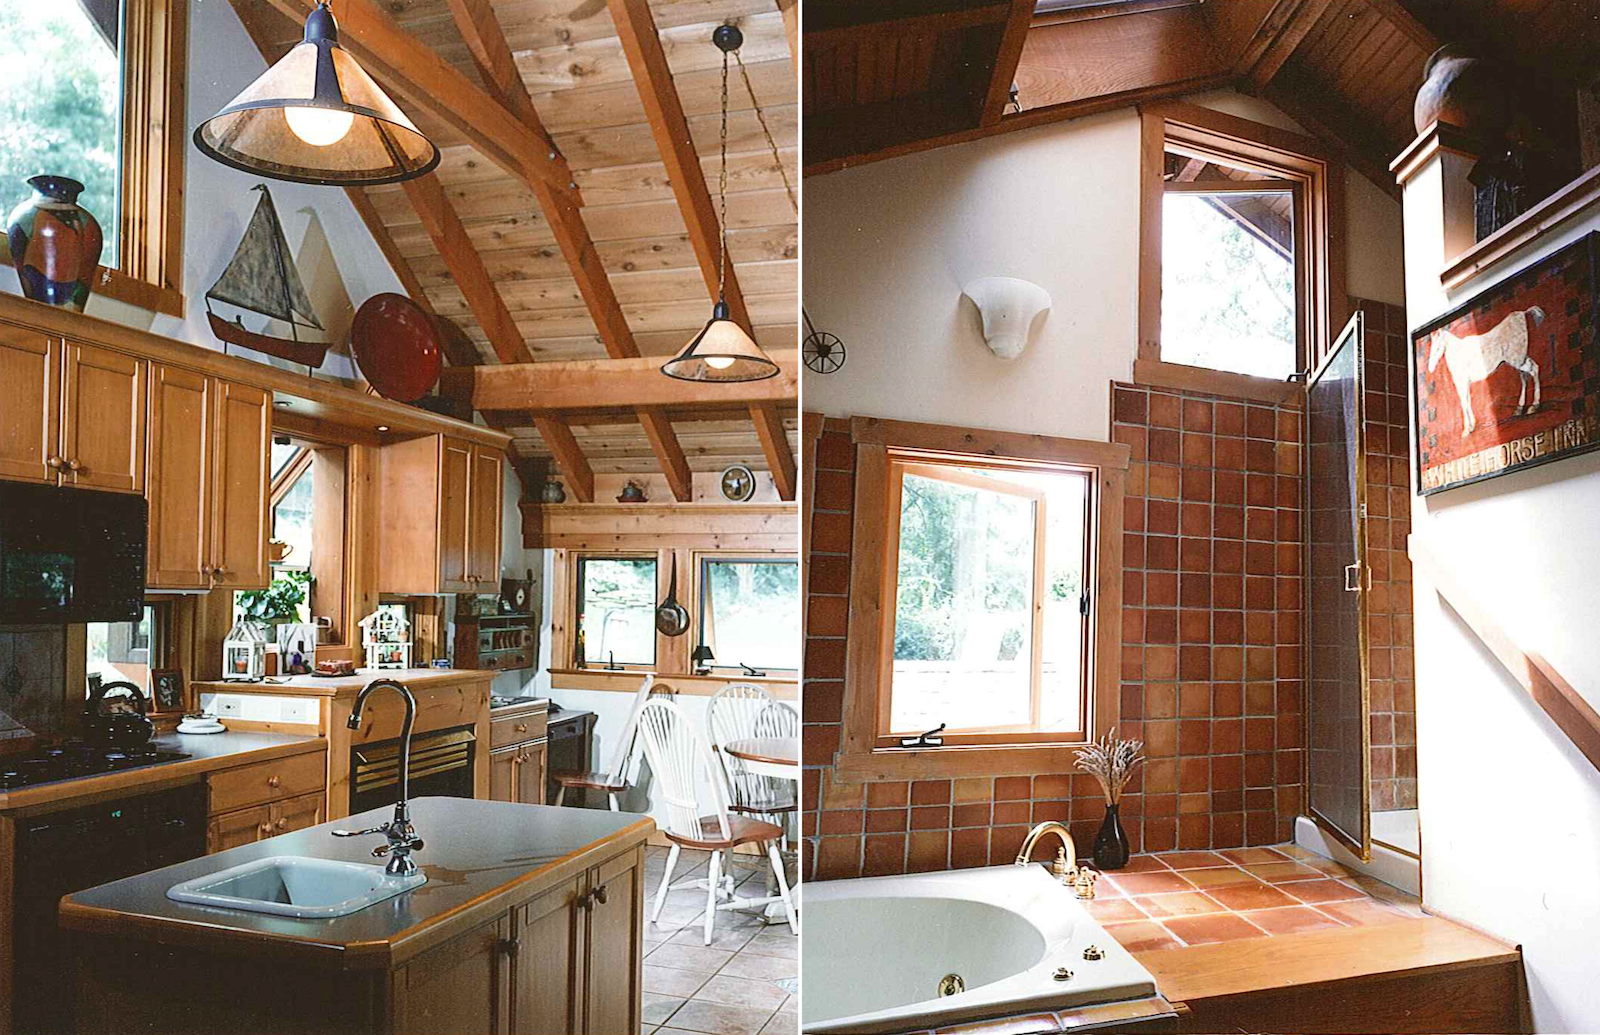 Macht - Kitchen and Master Bathroom.png